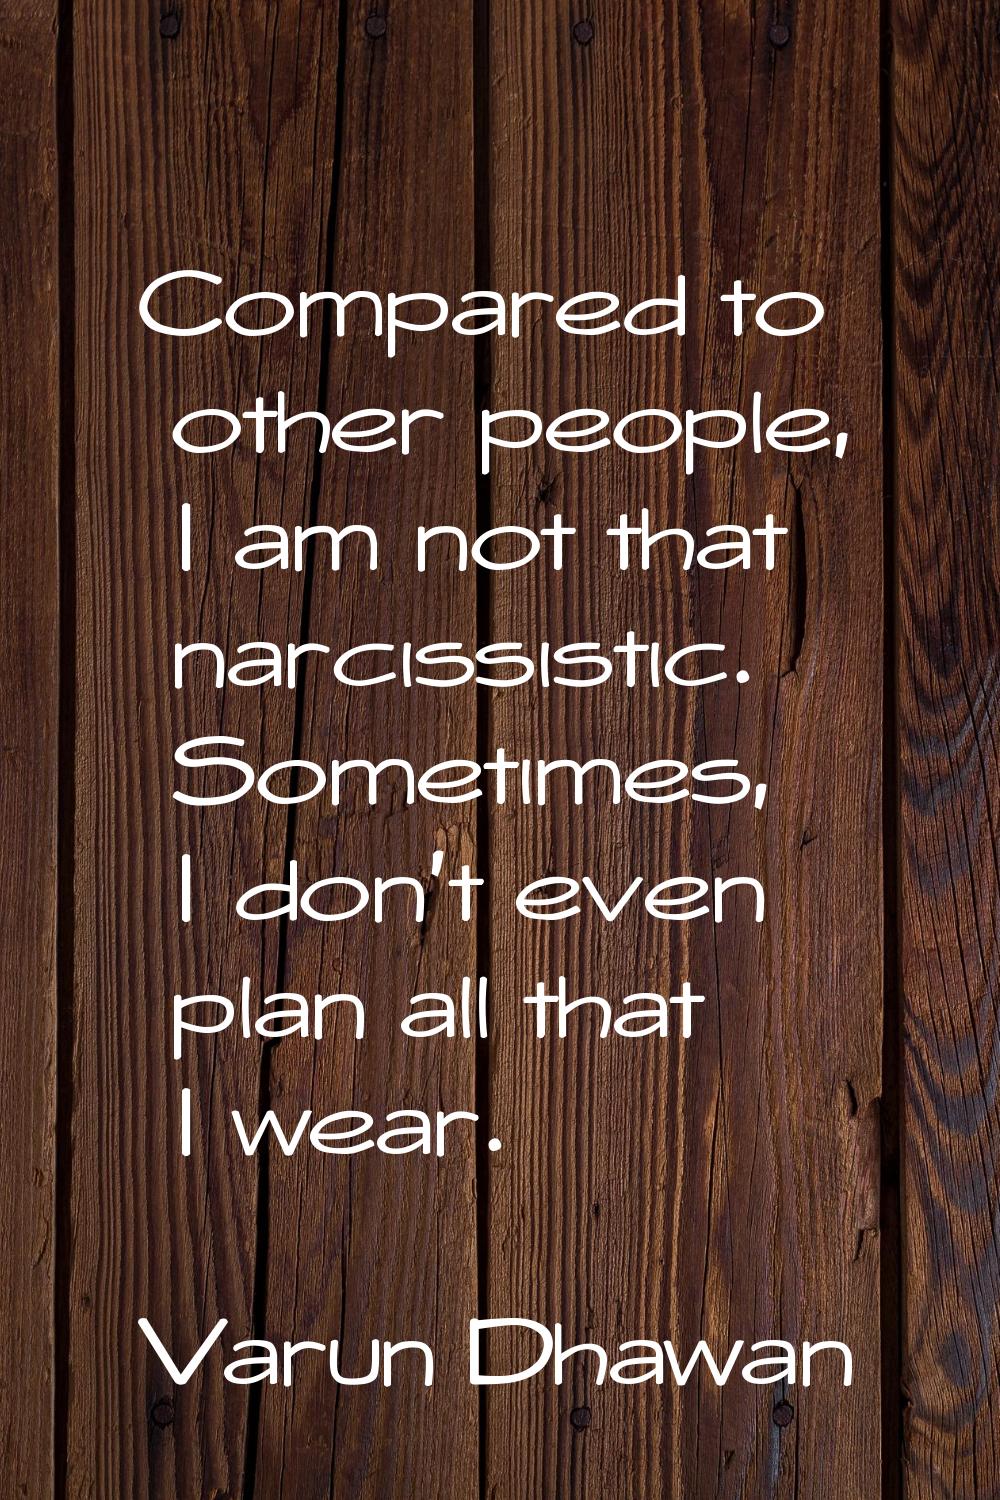 Compared to other people, I am not that narcissistic. Sometimes, I don't even plan all that I wear.